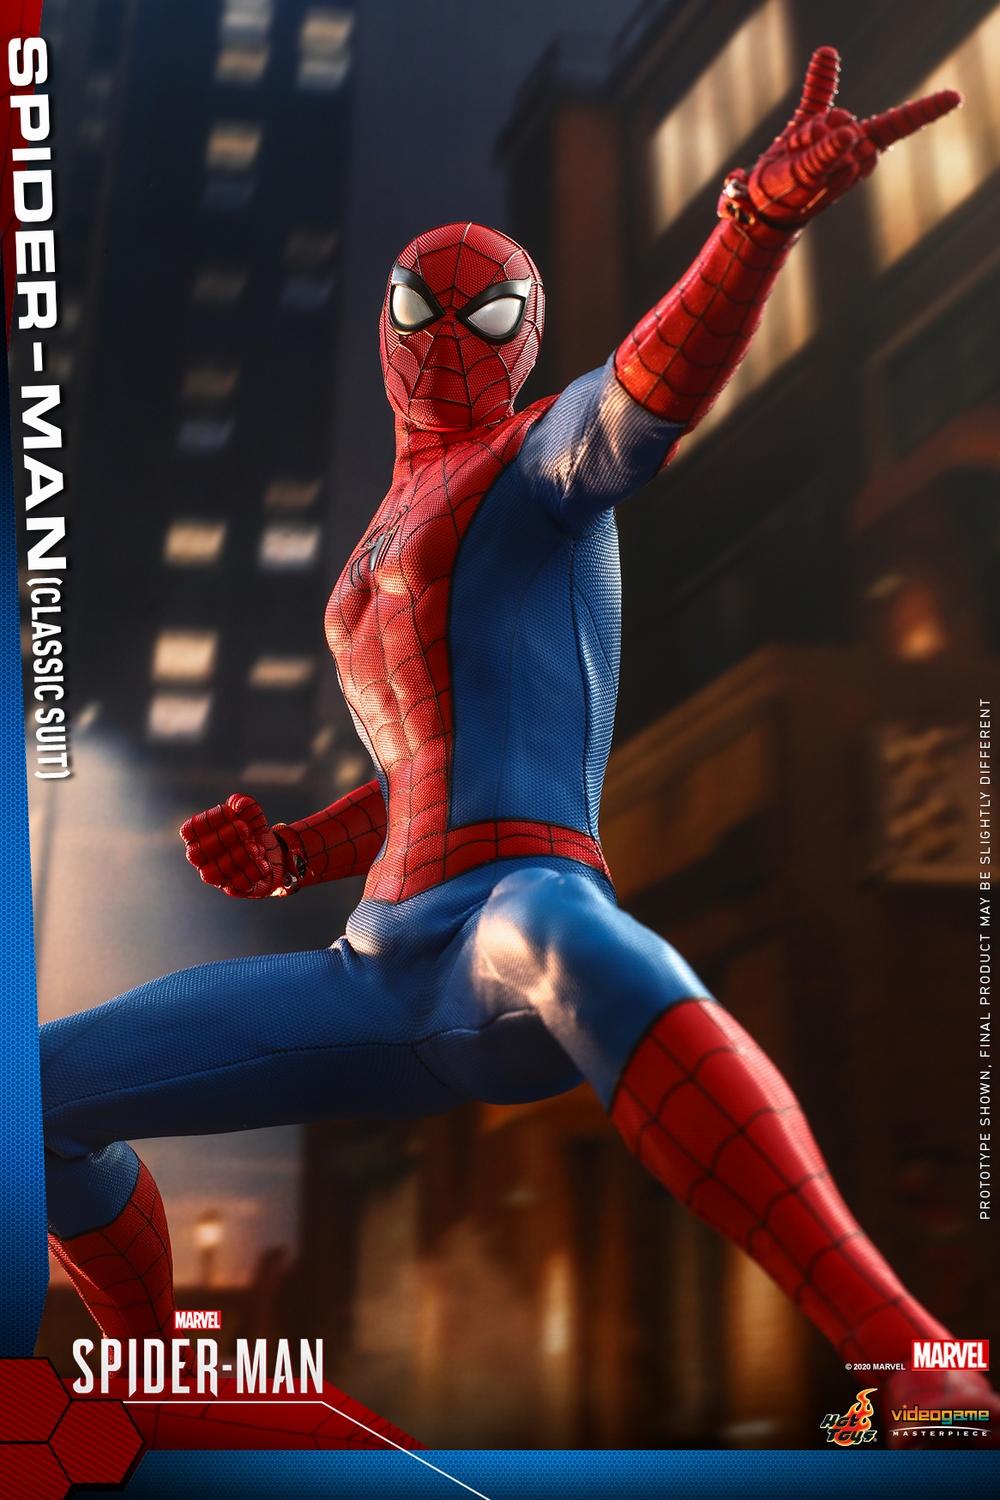 Hot Toys - MSM - Spider-Man (Classic Suit) collectible figure_PR07.jpg